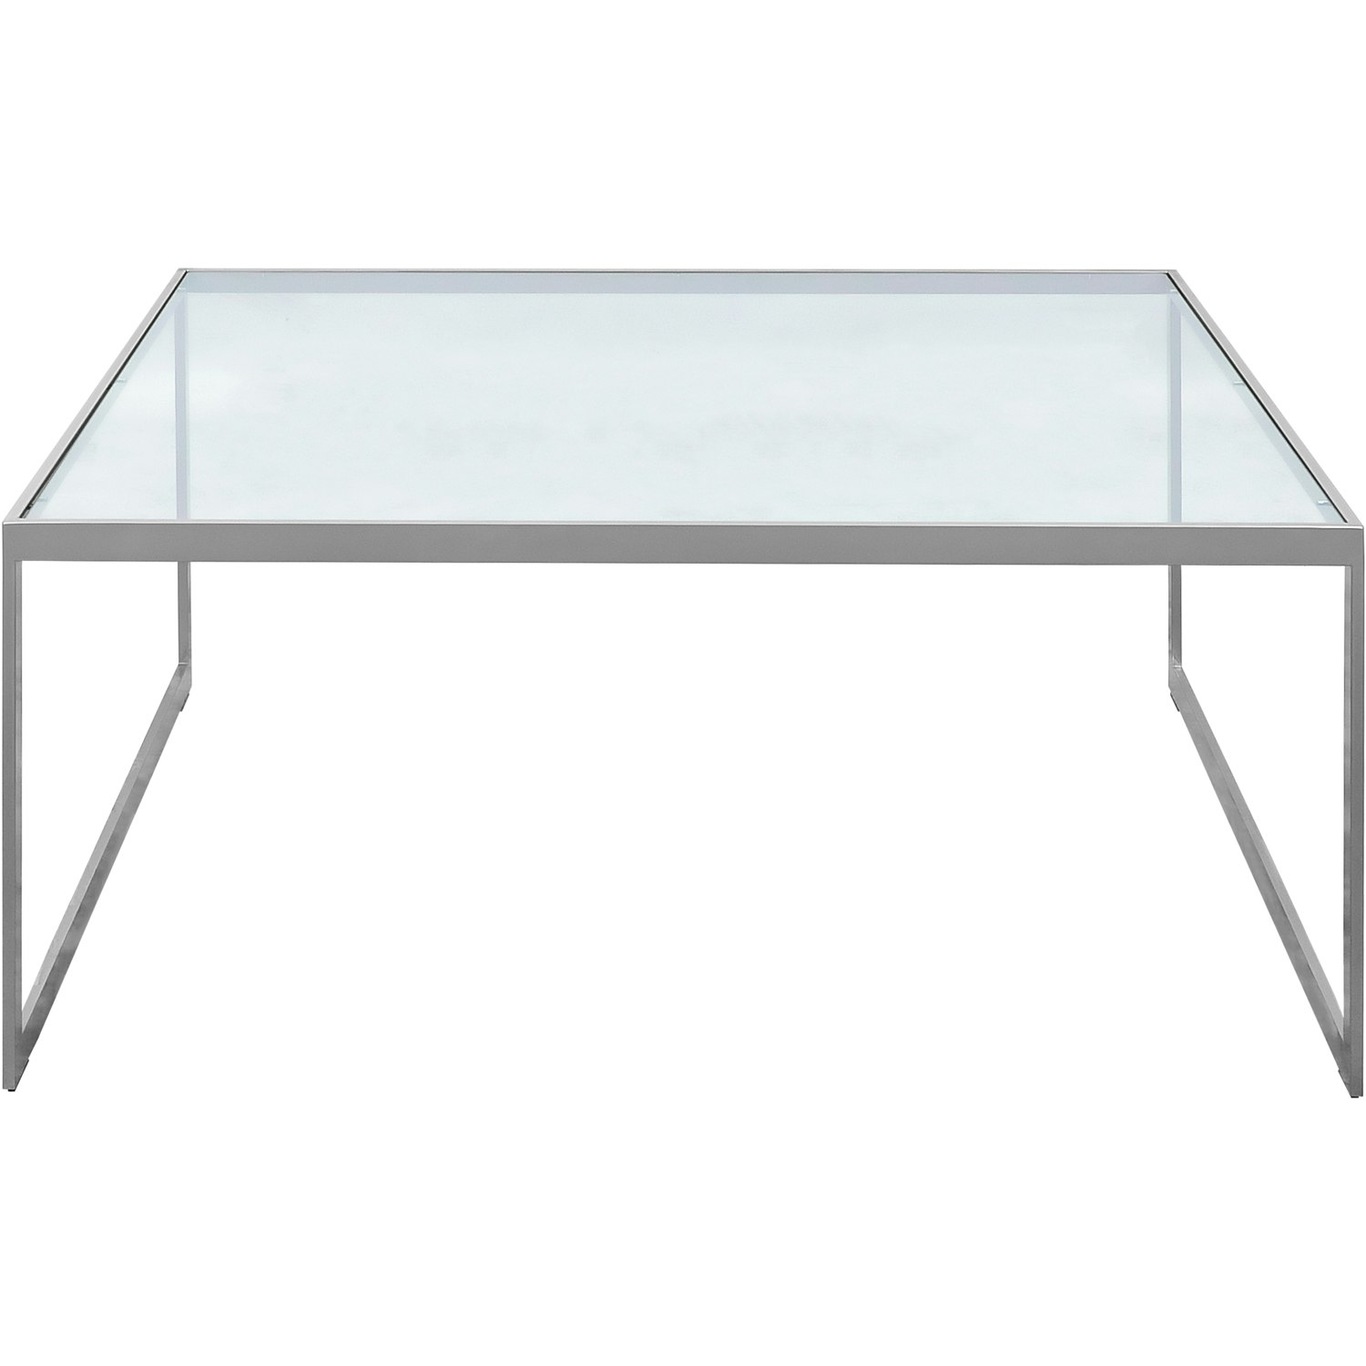 Square Coffee Table, 102x102 cm, Silver Grey/Glass